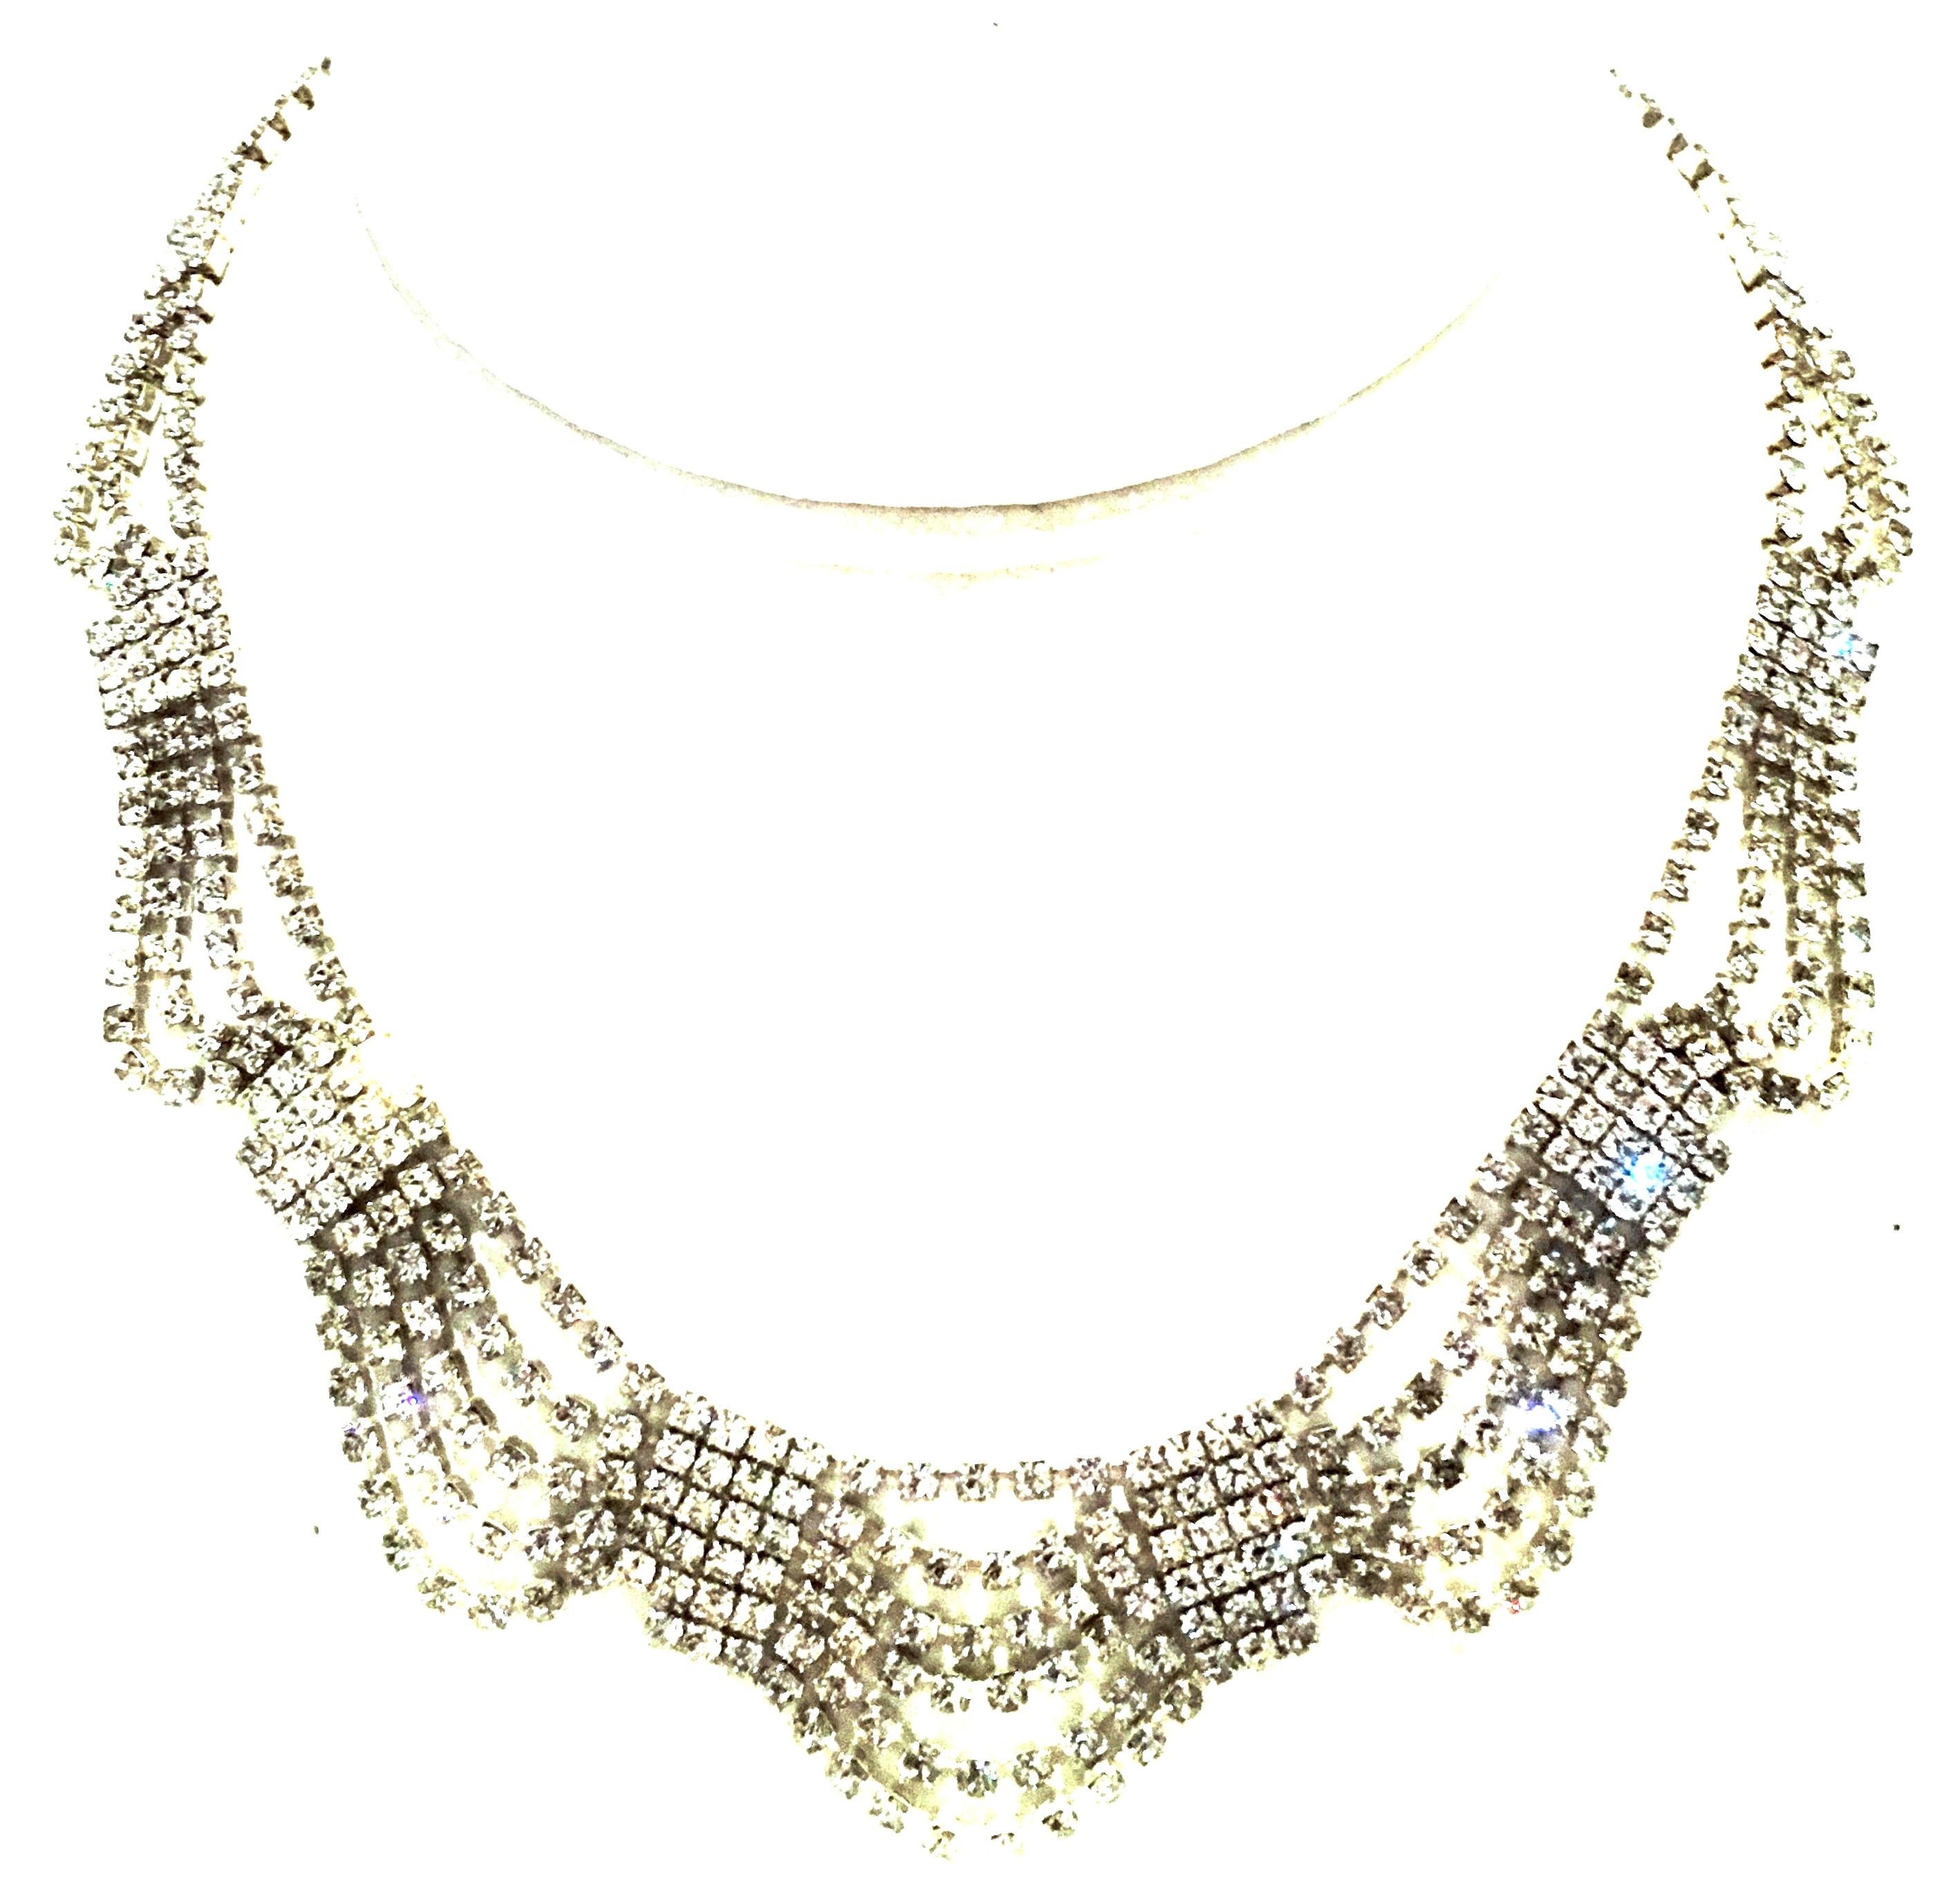 20th Century Art Deco Style Silver Plate & Austrian Crystal Five Row Swag Choker Necklace. Features silver plate metal with brilliant crystal clear round Austrian crystal cut and faceted prong set stones. Fold over box style locking clasp.